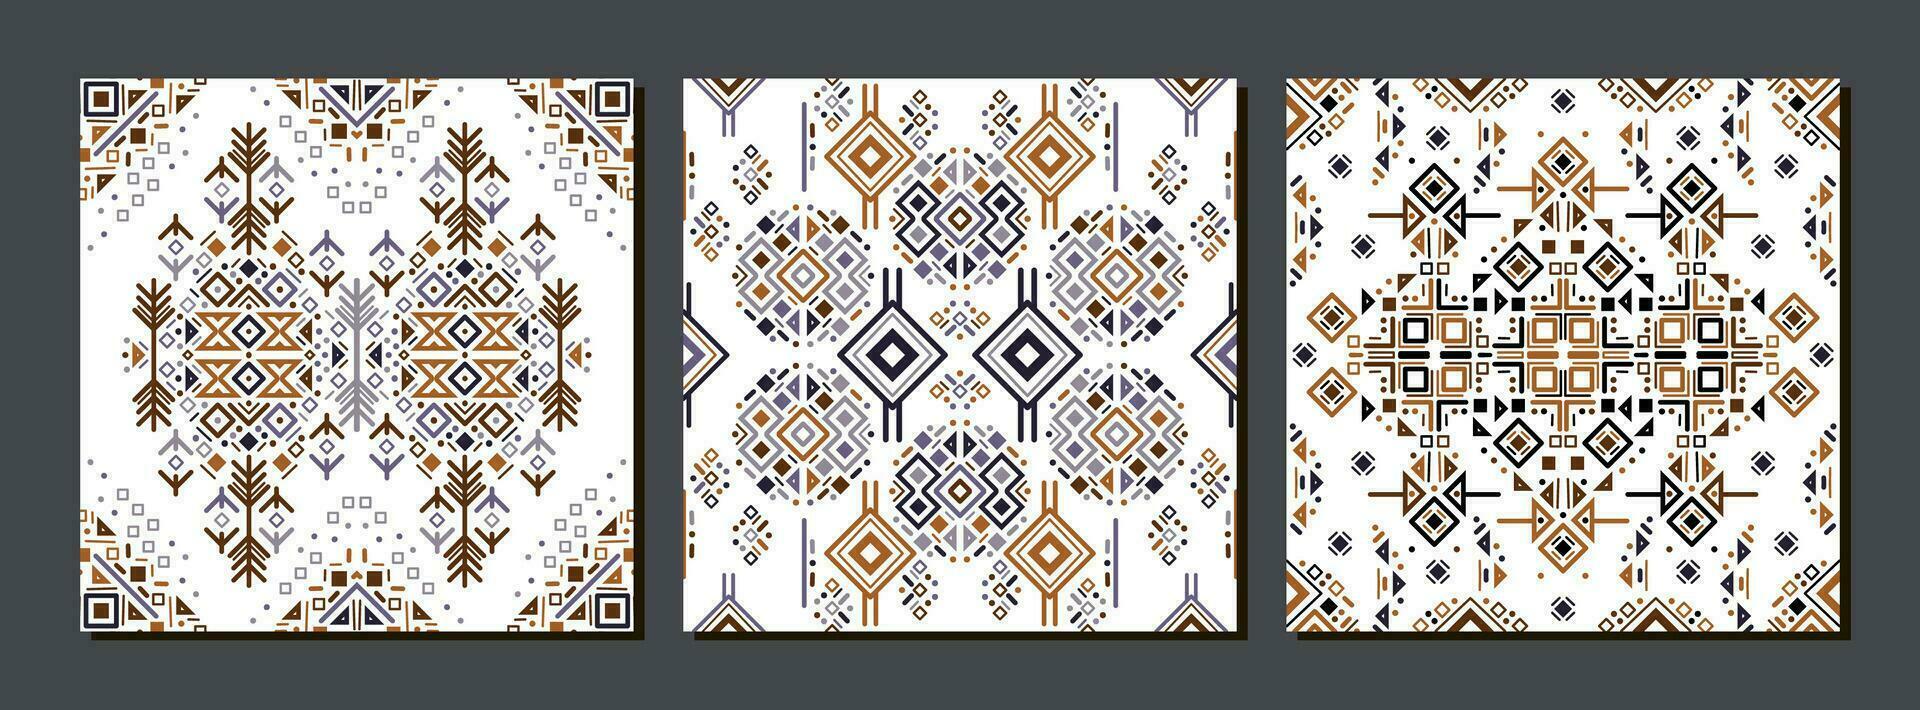 Tribal ethnic seamless pattern in Aztec style. Ikat geometric folklore ornament vector